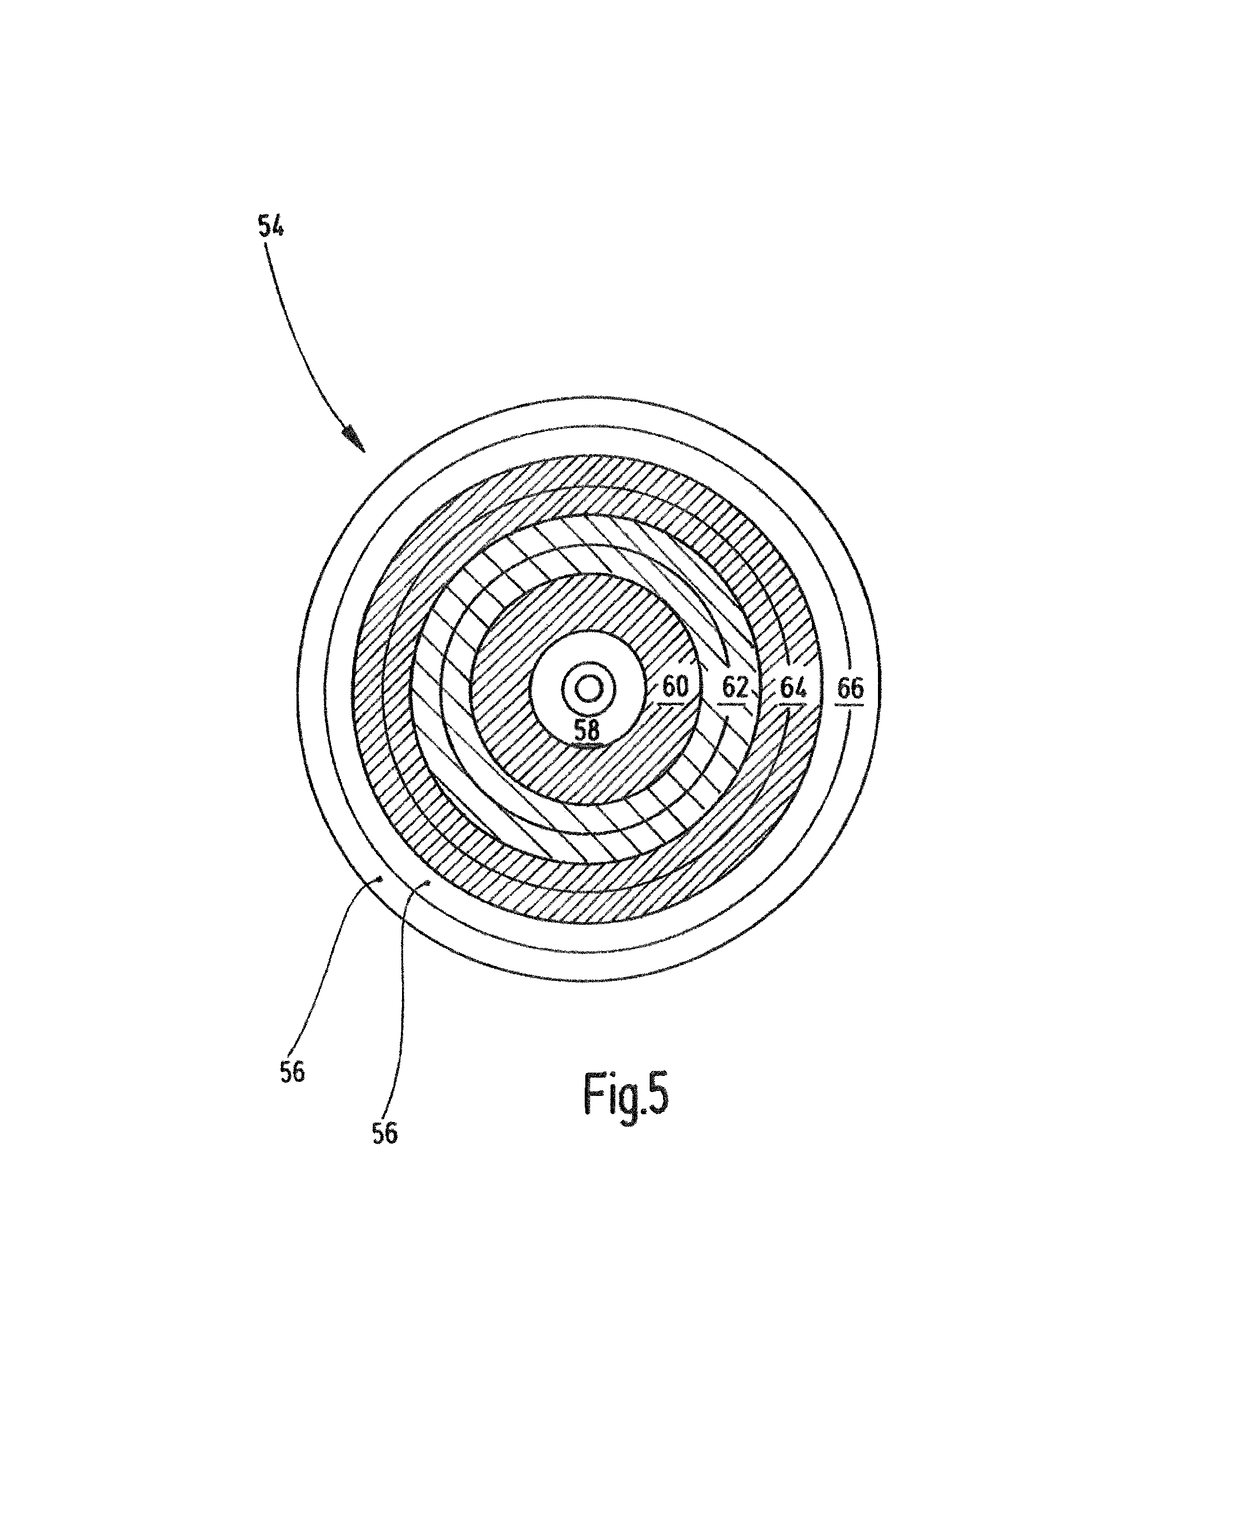 Lens and method for enhanced visual targeting of a sports archery target